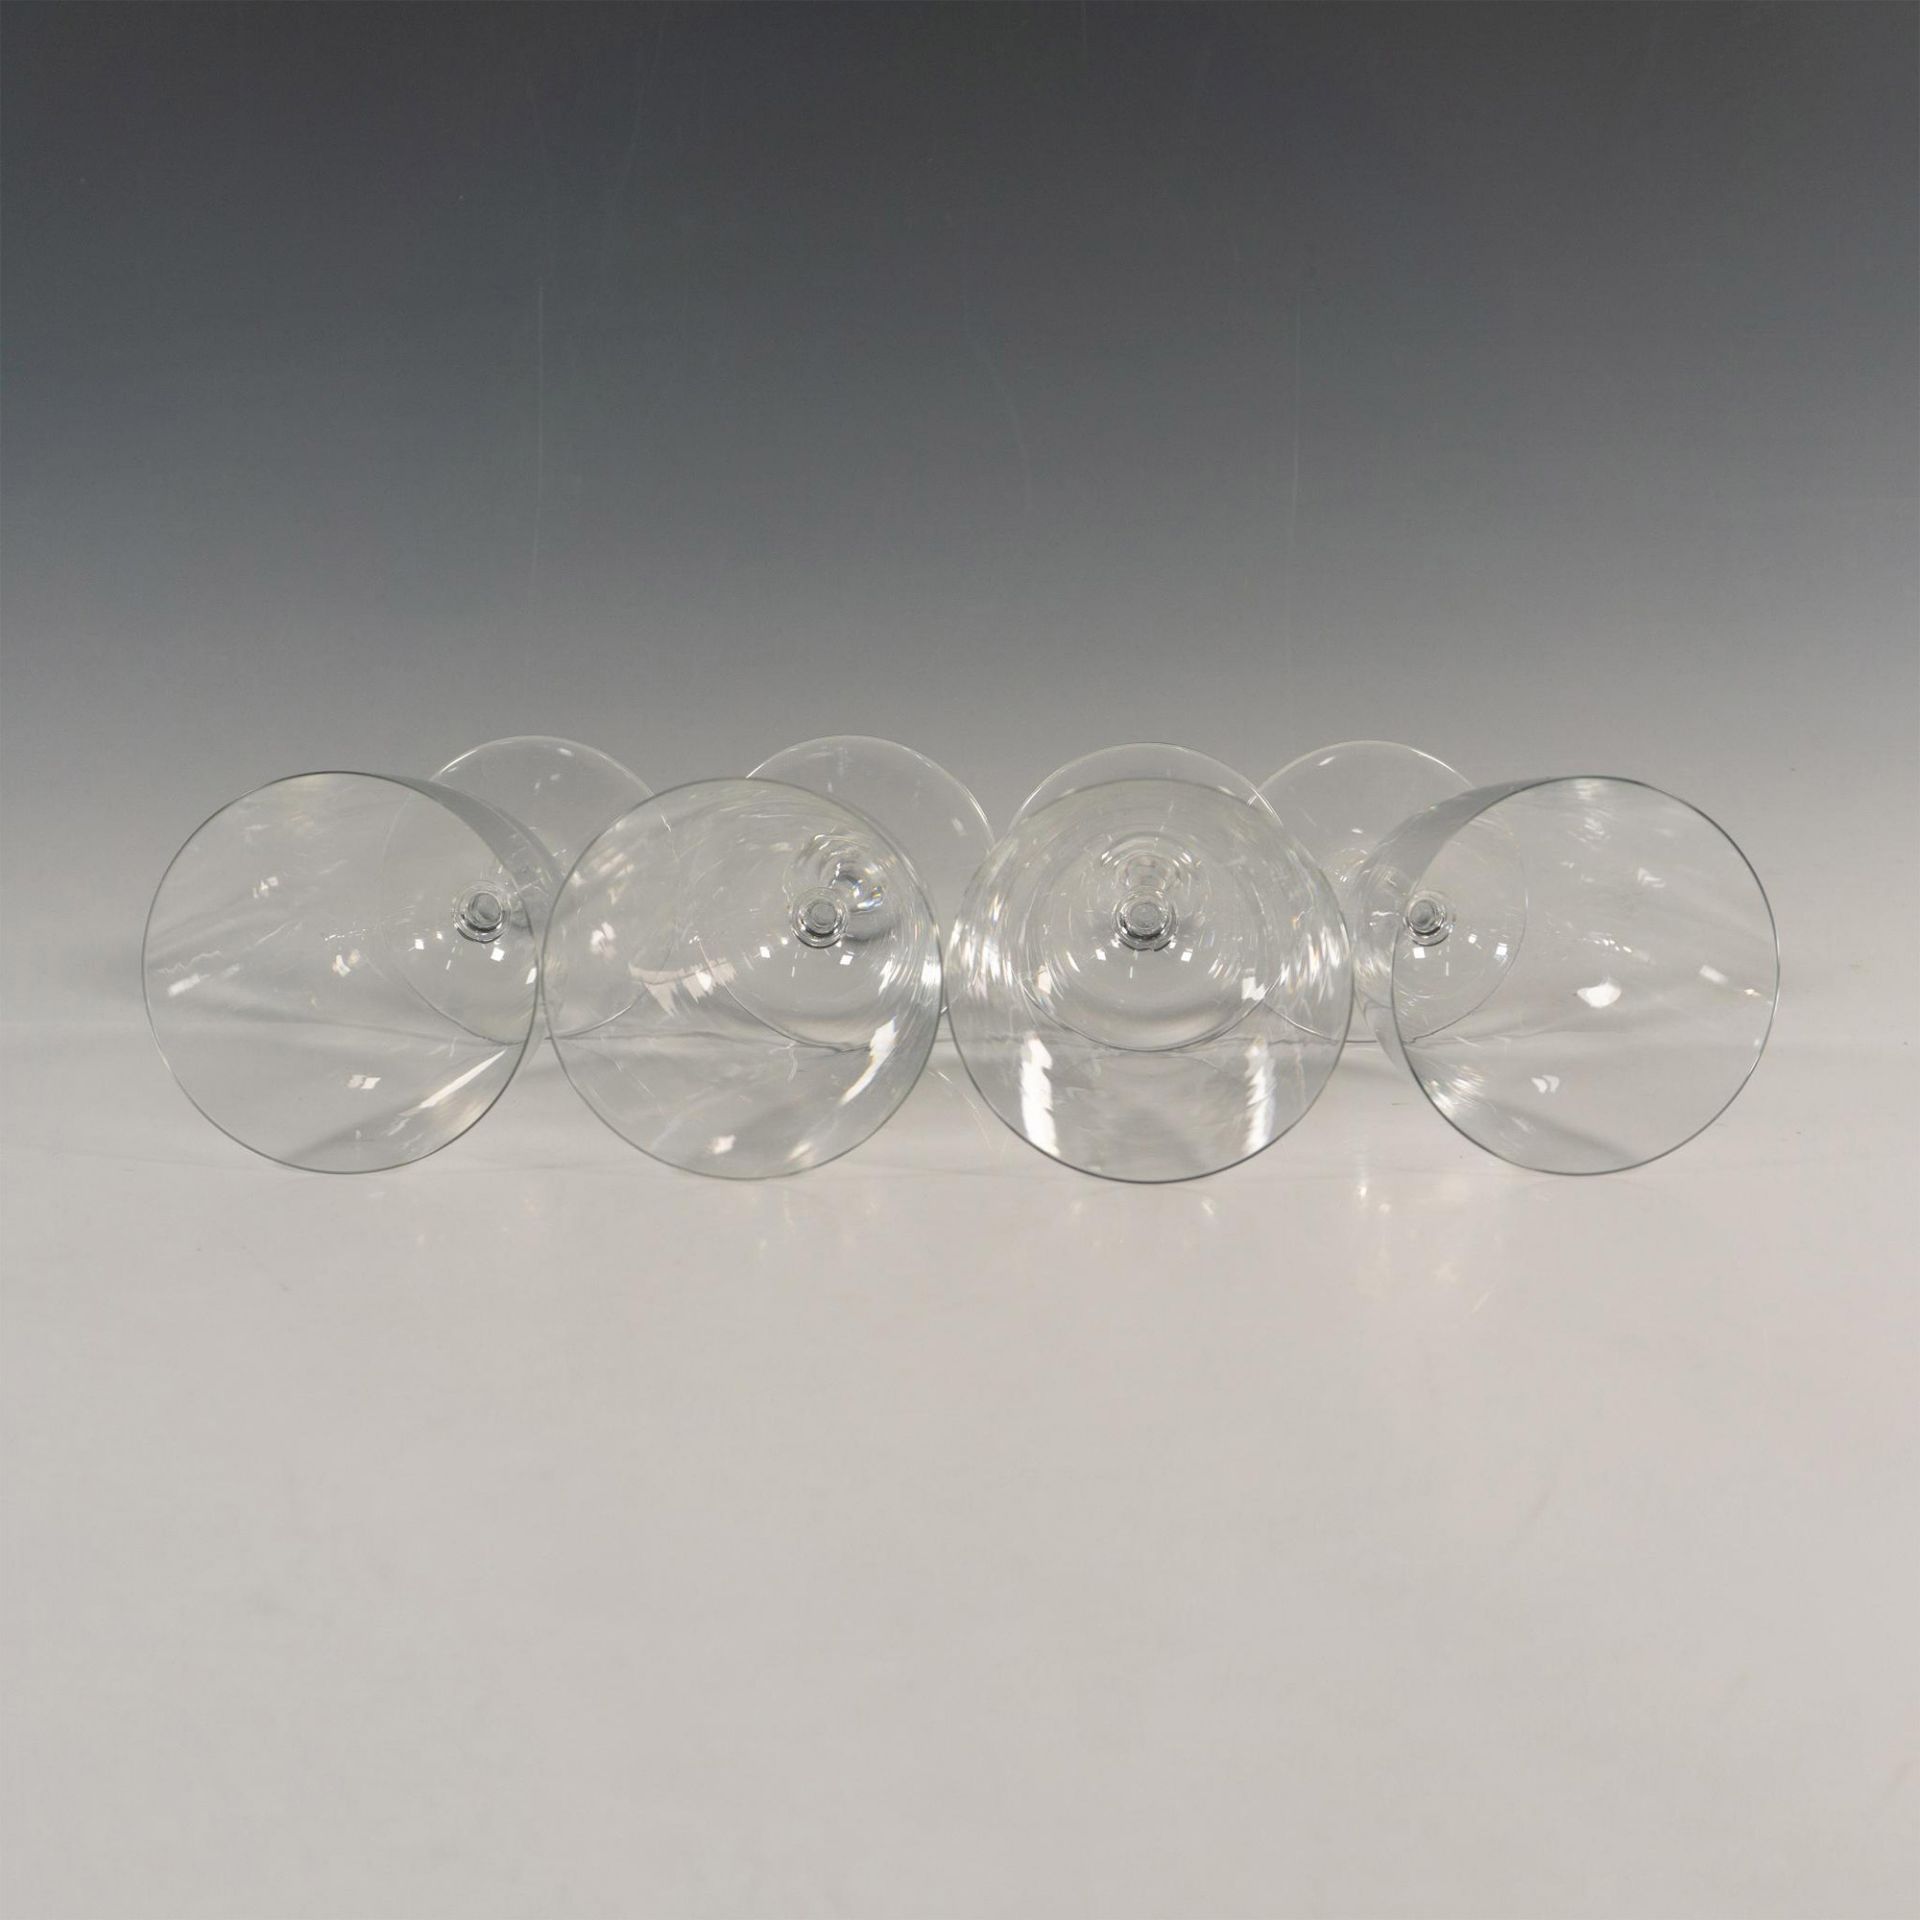 4pc Baccarat Crystal Water Goblet Glasses - Image 3 of 3